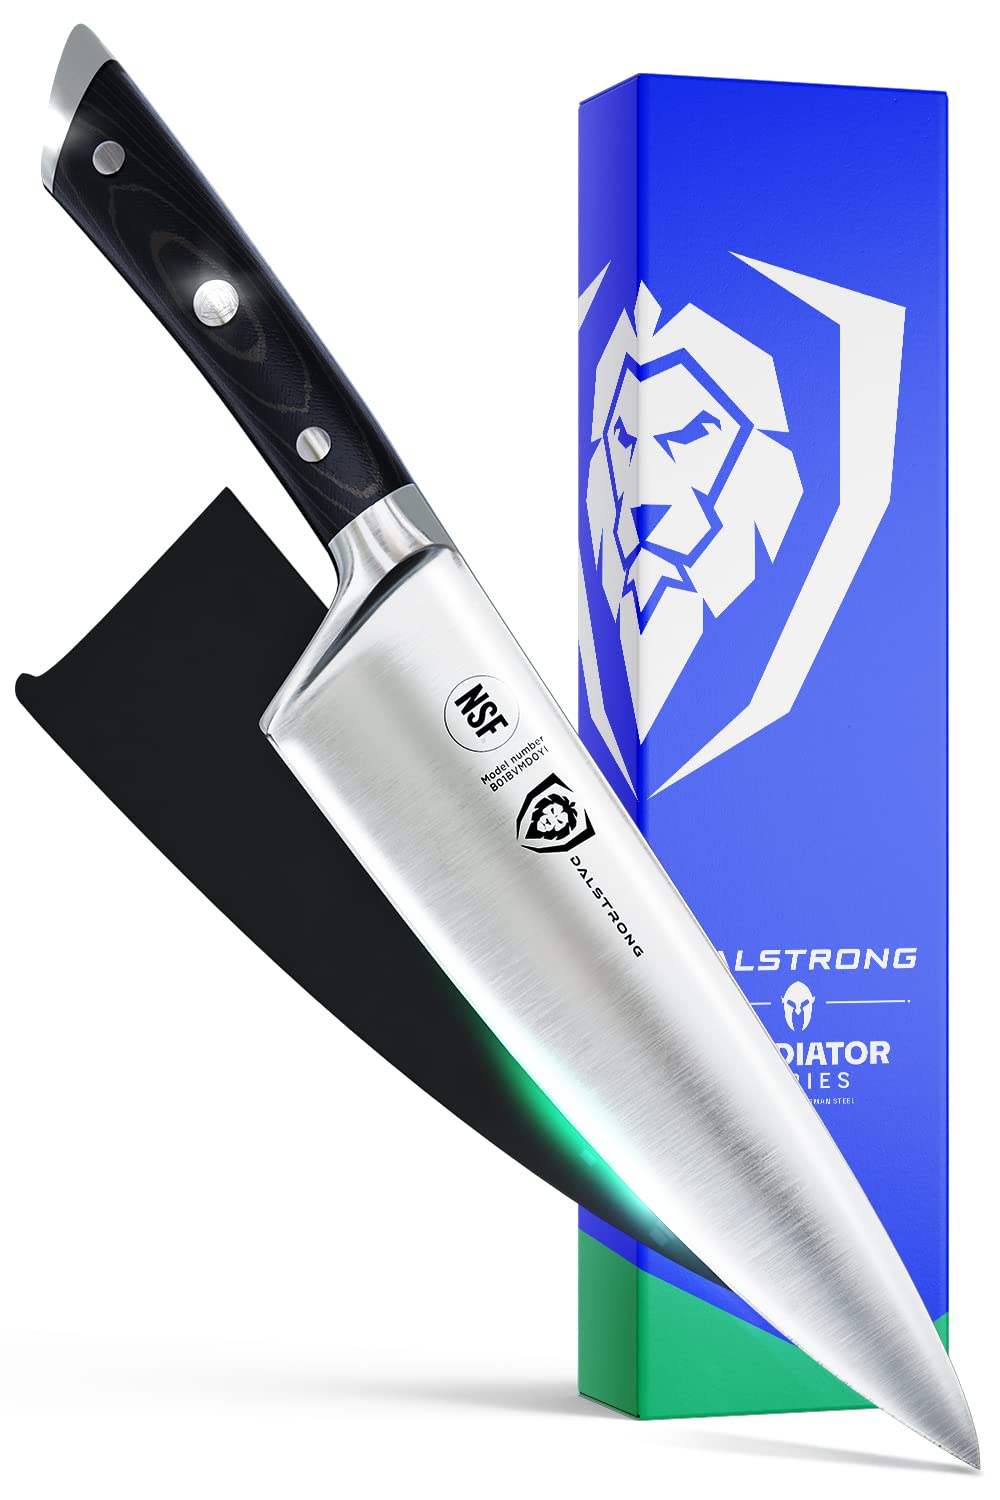 Dalstrong Gladiator Series Serrated Offset Bread Knife 8" Bundled with Chef Knife 8" - Elite - NSF Certified